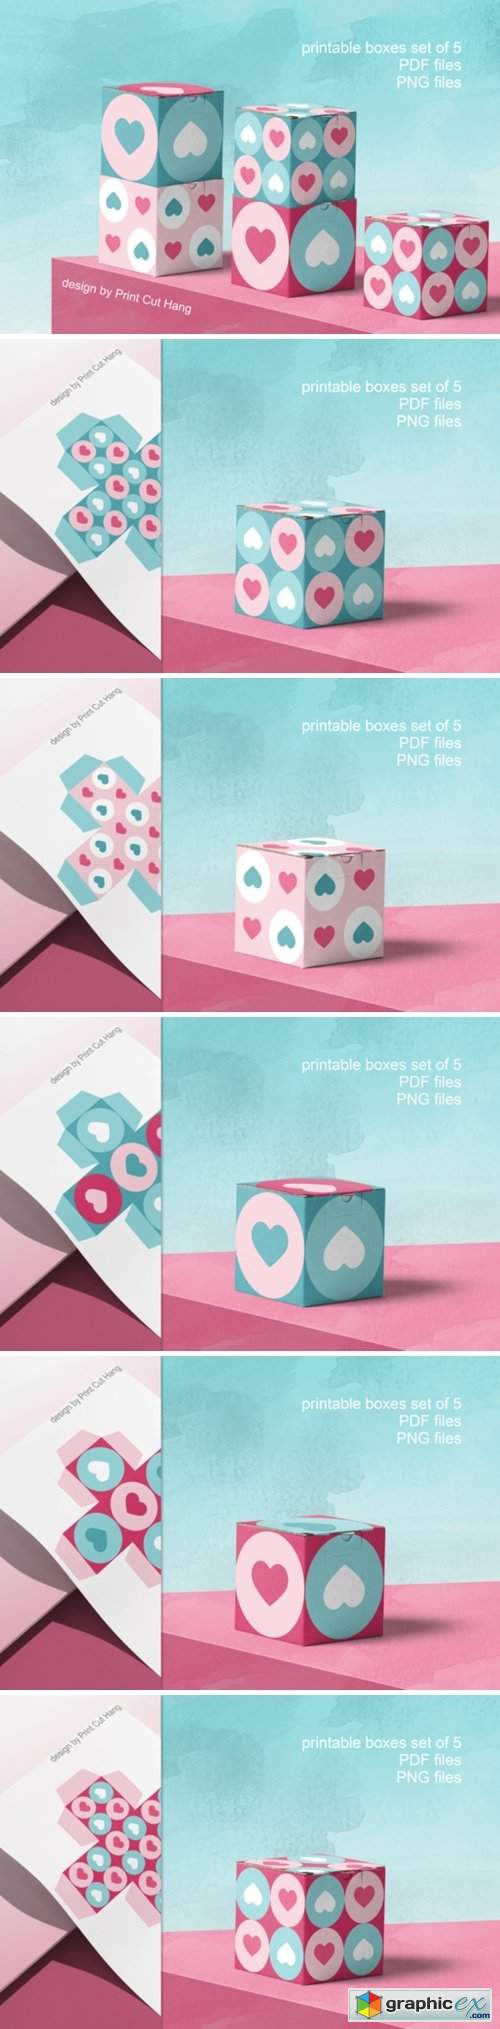  Printable Boxes for Valentine Gifts PDF 